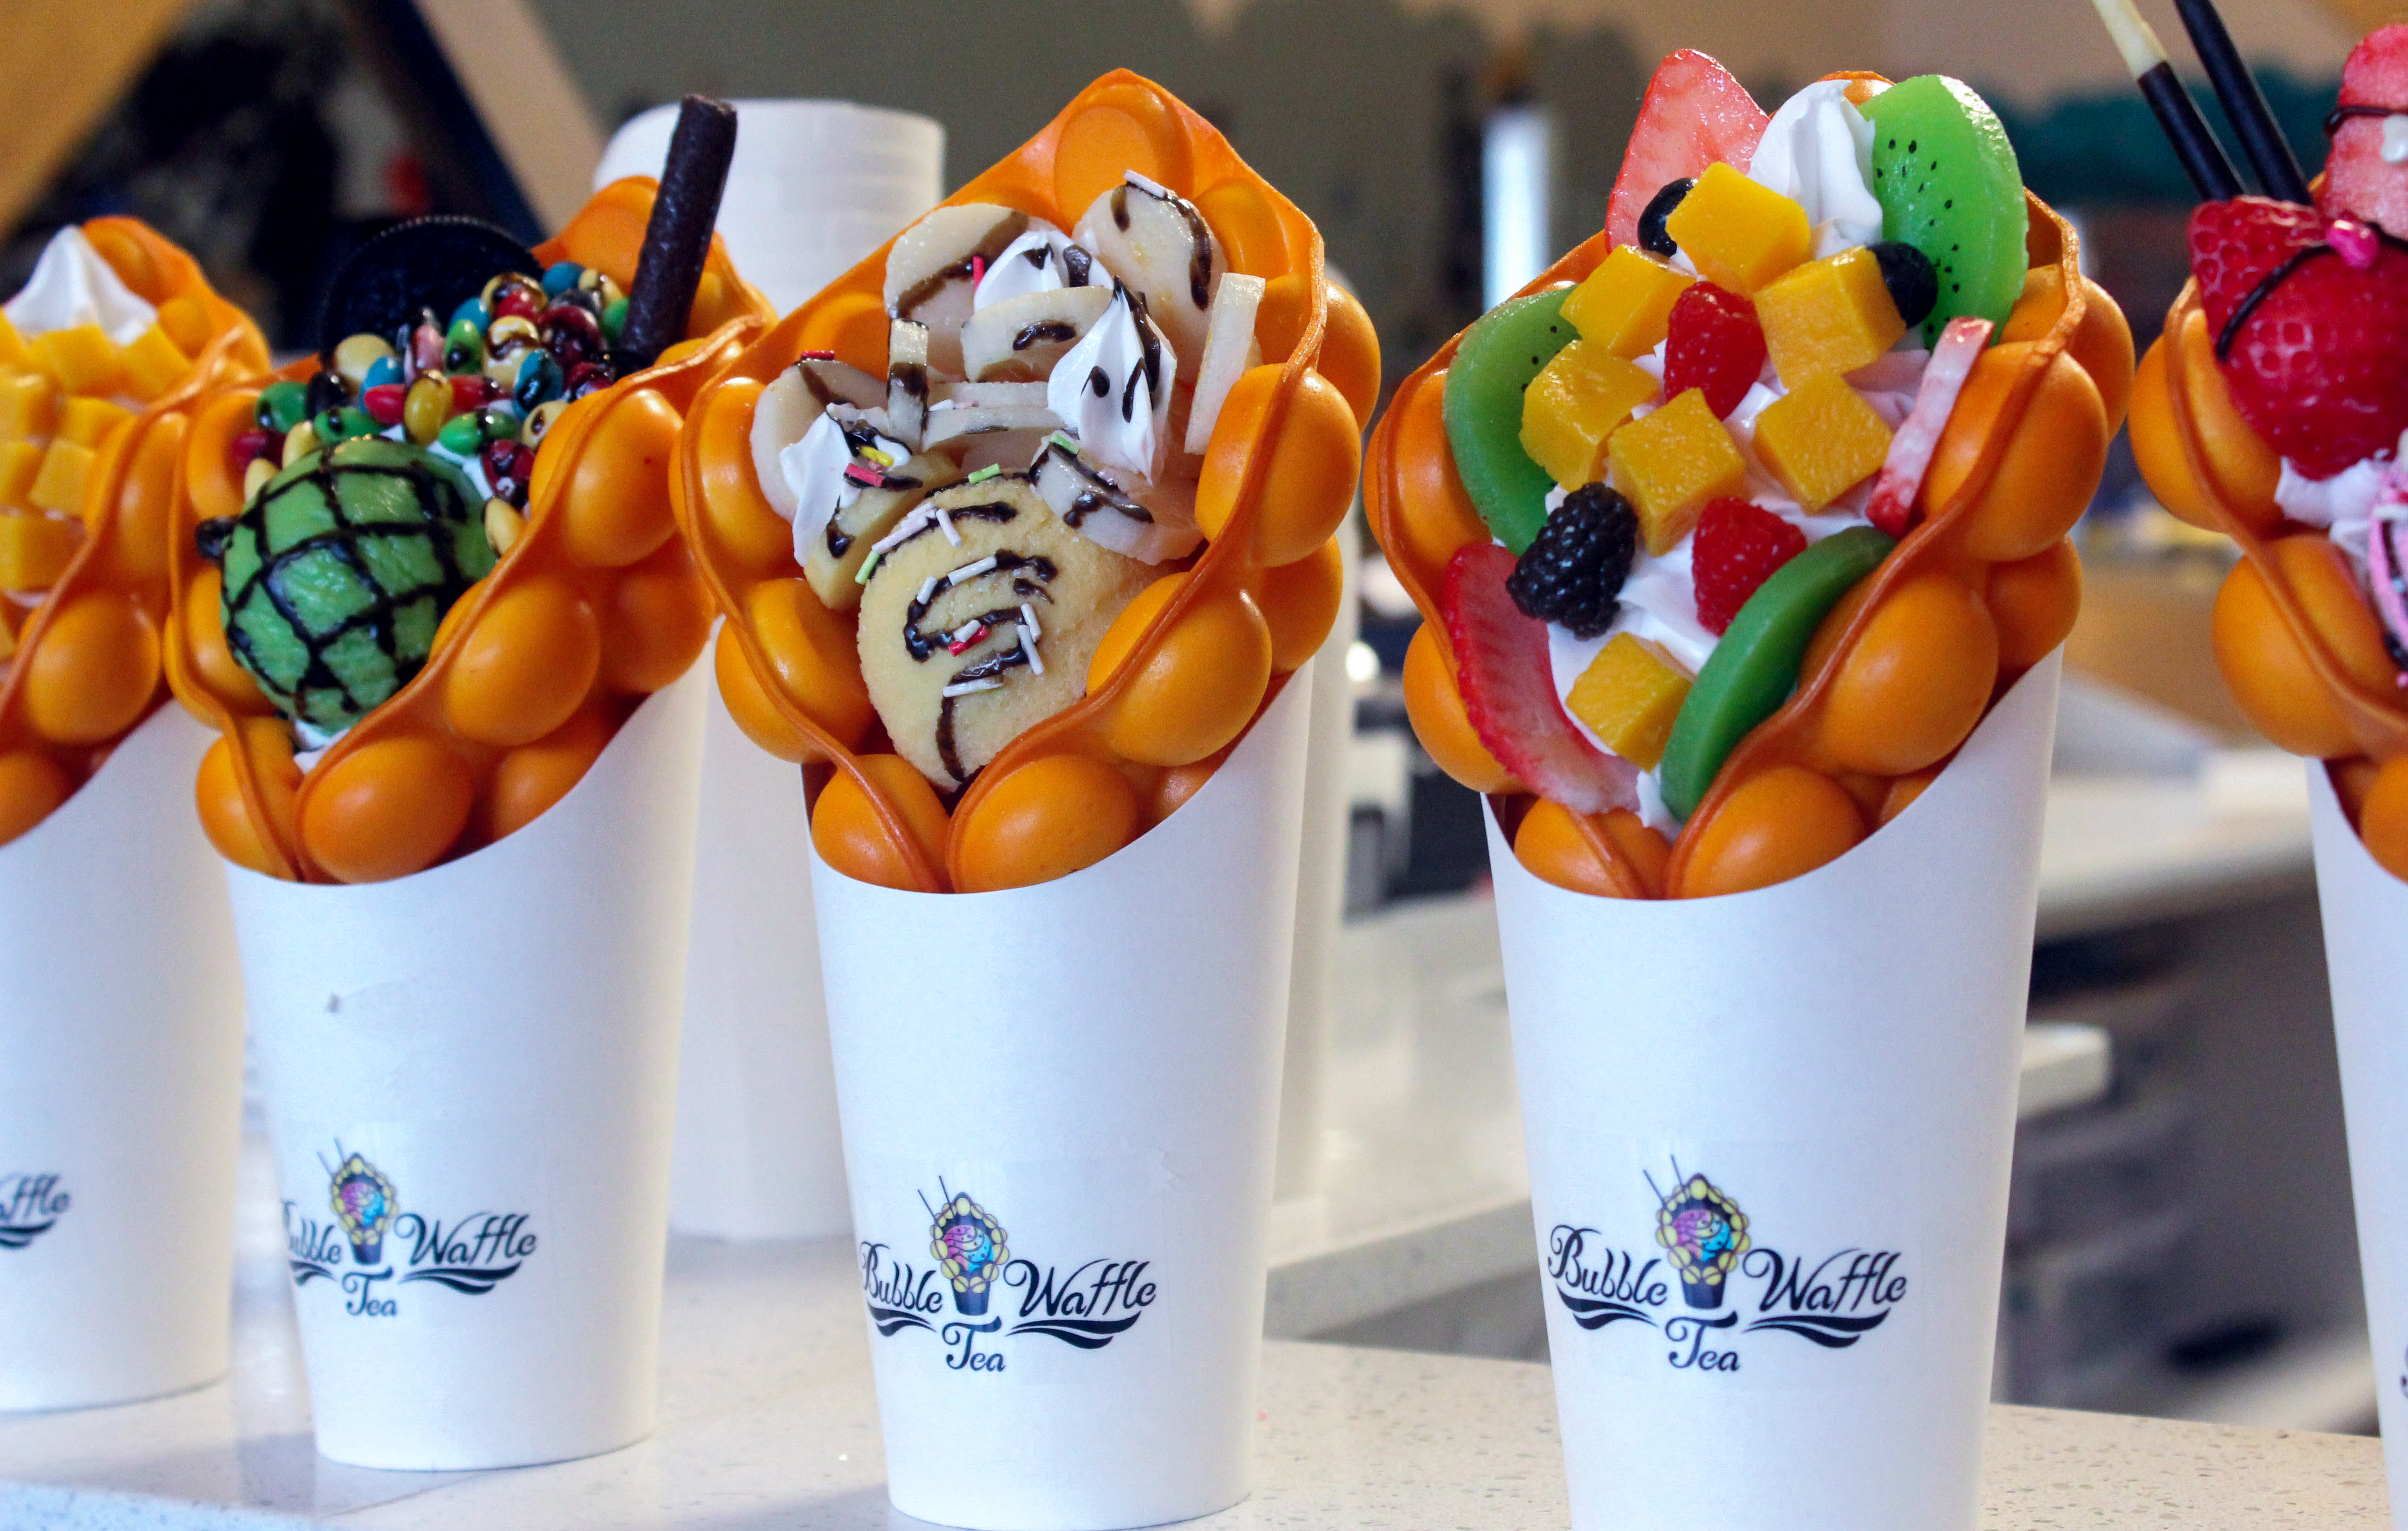 Snack Break: Bubble waffles have arrived at Bubble Waffle & Tea